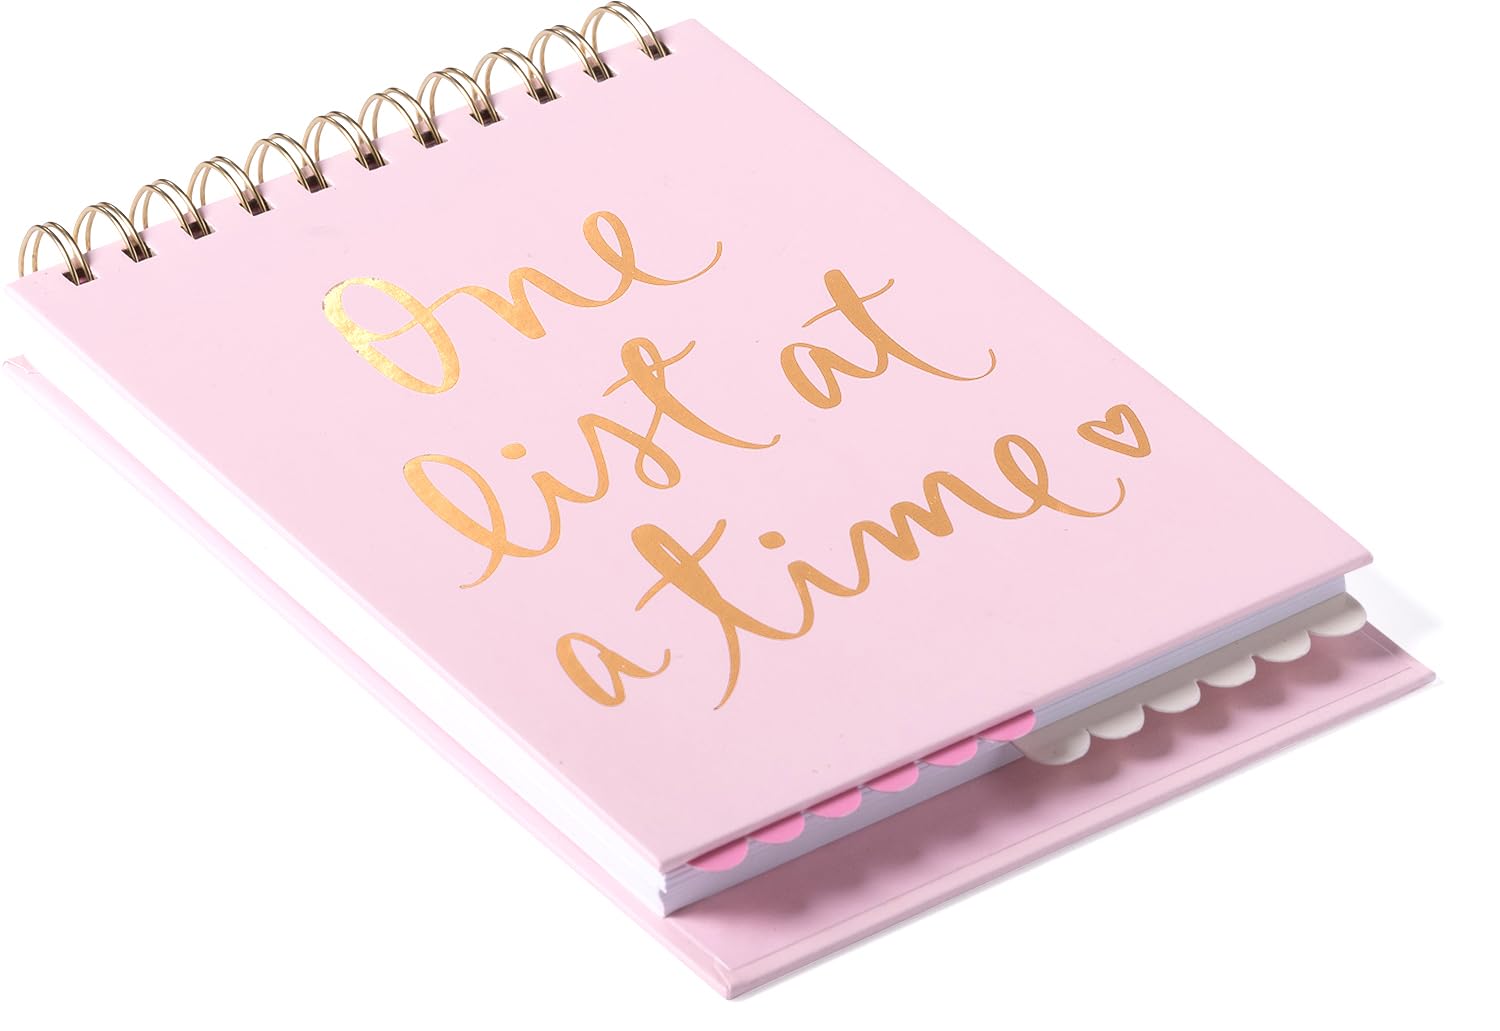 Eccolo Pink Lined Top Spiral Notebook